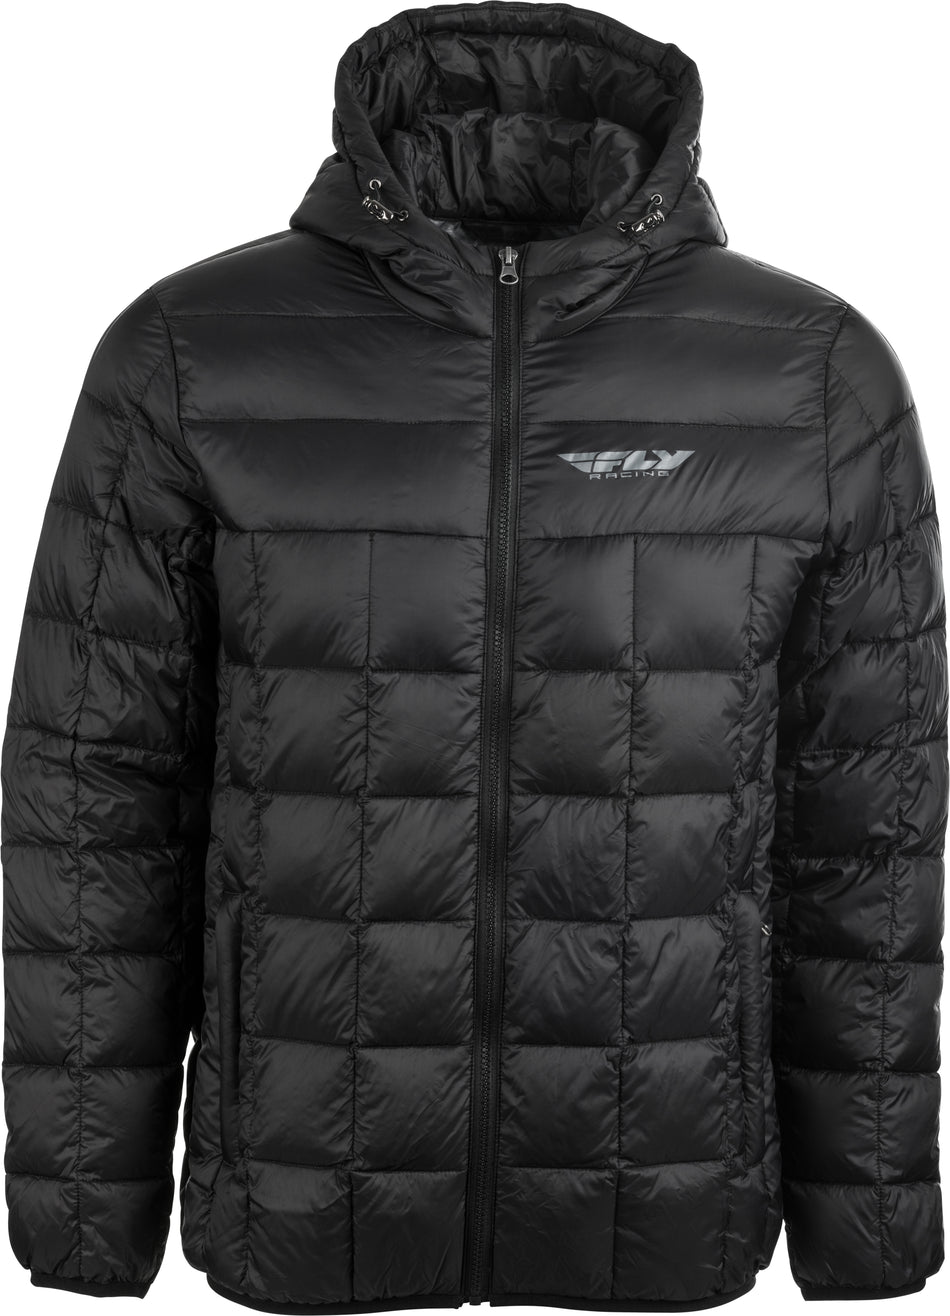 FLY RACING Fly Spark Down Jacket Black Sm 354-6180S